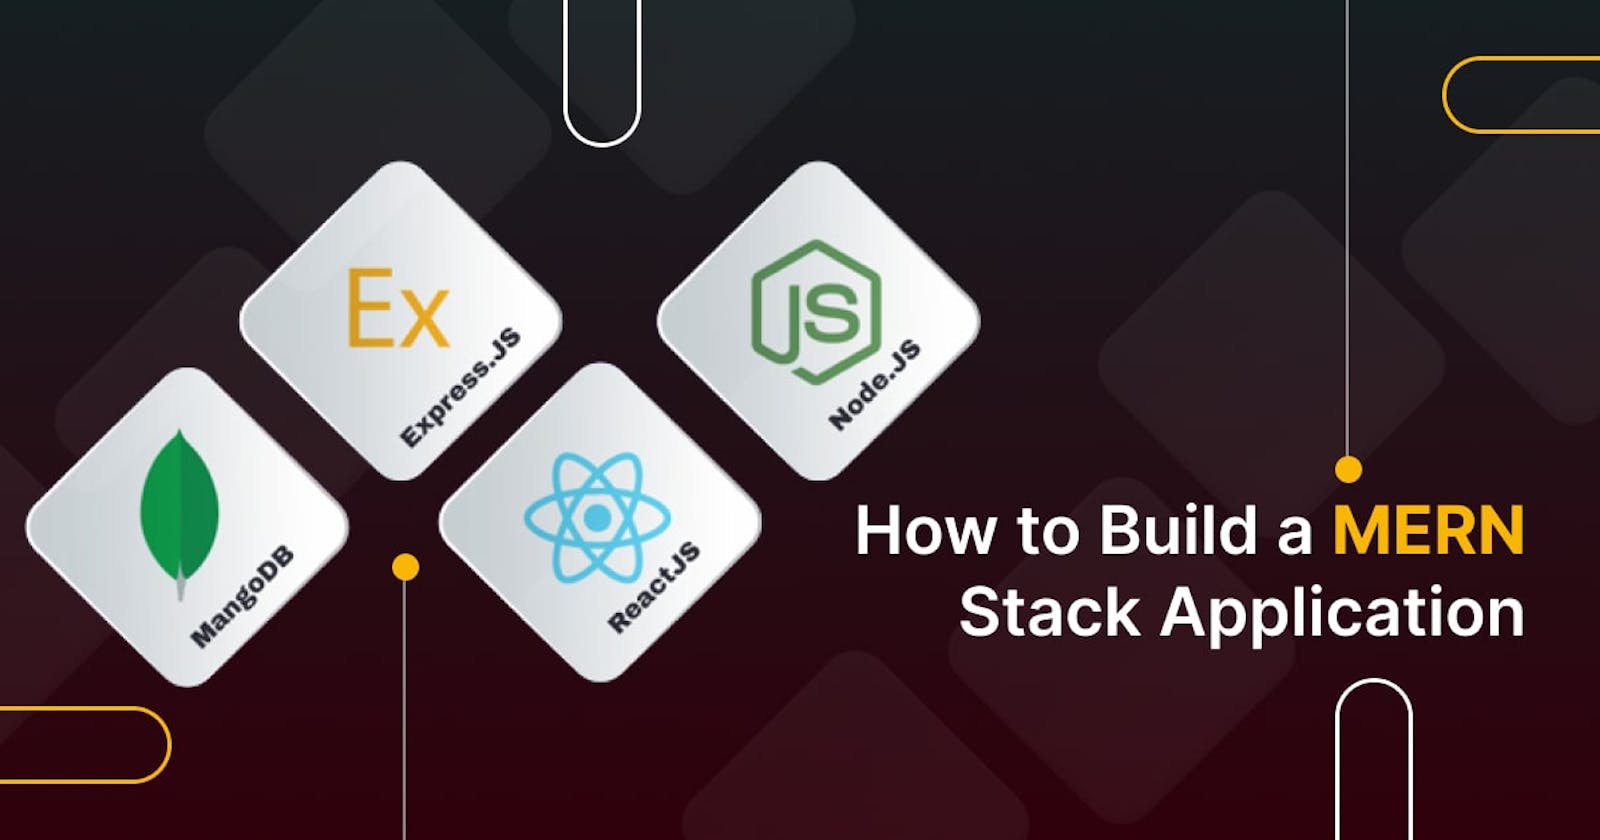 Learn strategies for building scalable web applications using MERN Stack.